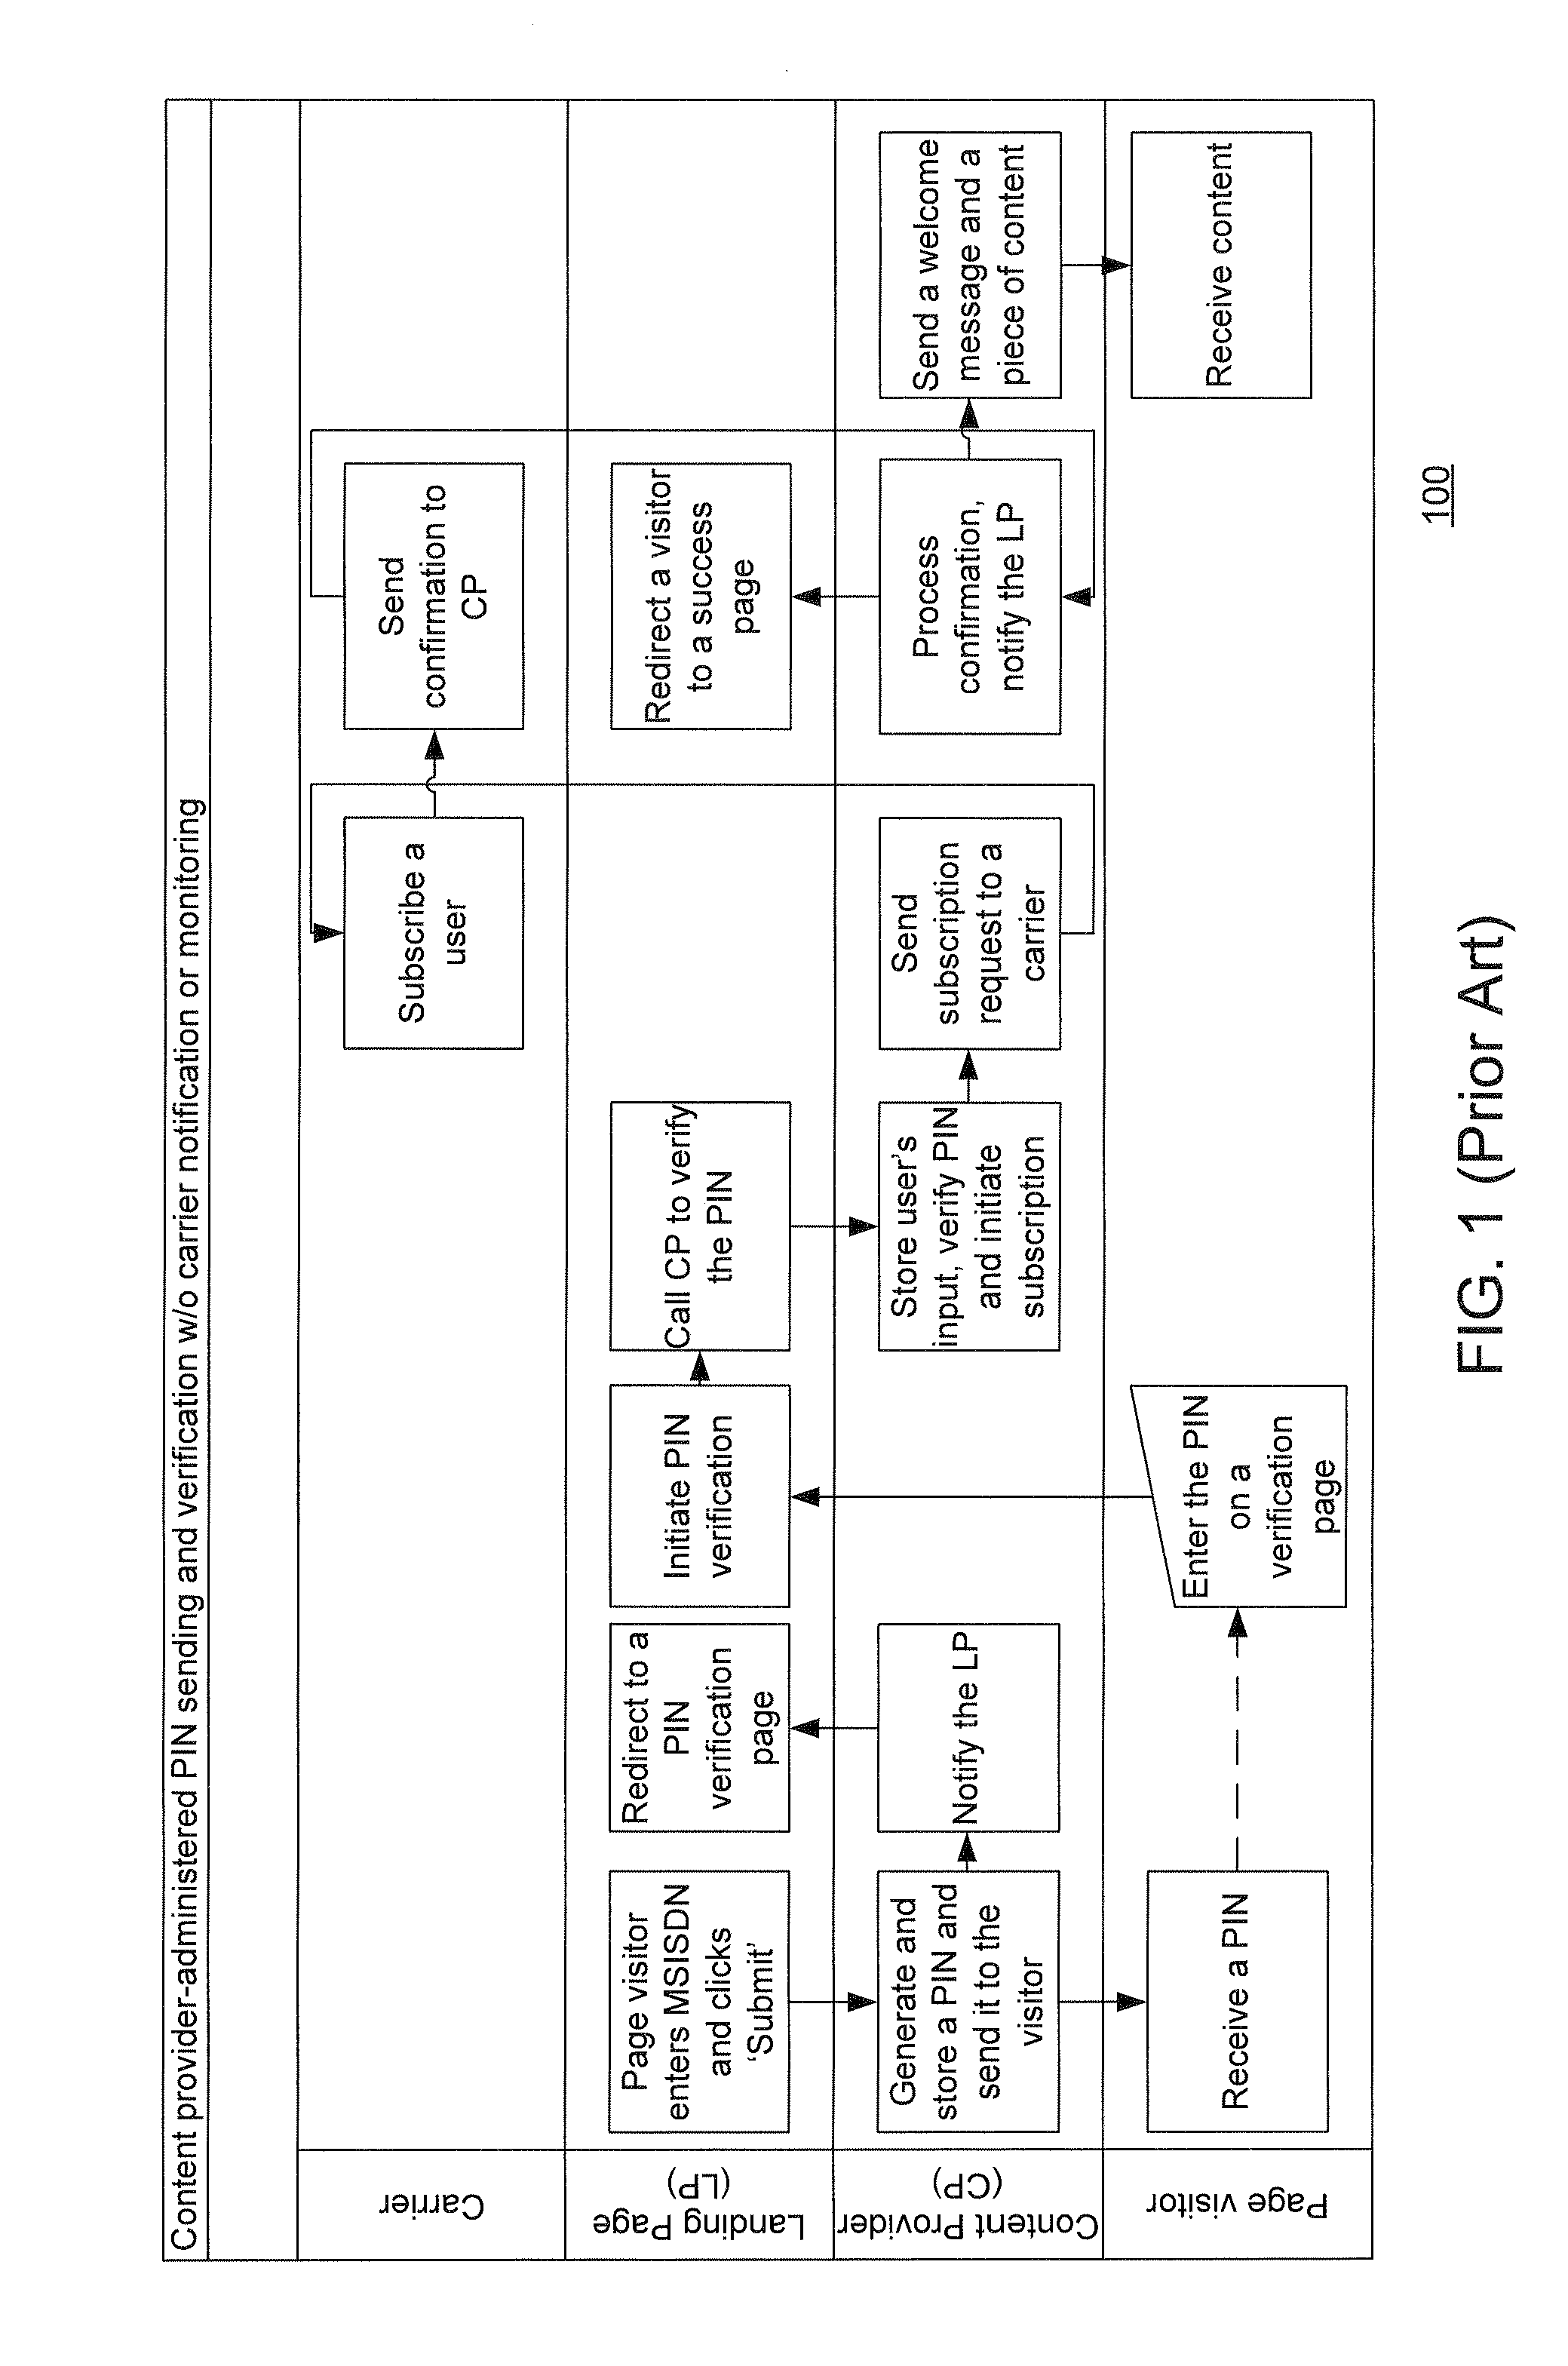 Method and system for providing real-time access to mobile commerce purchase confirmation evidence